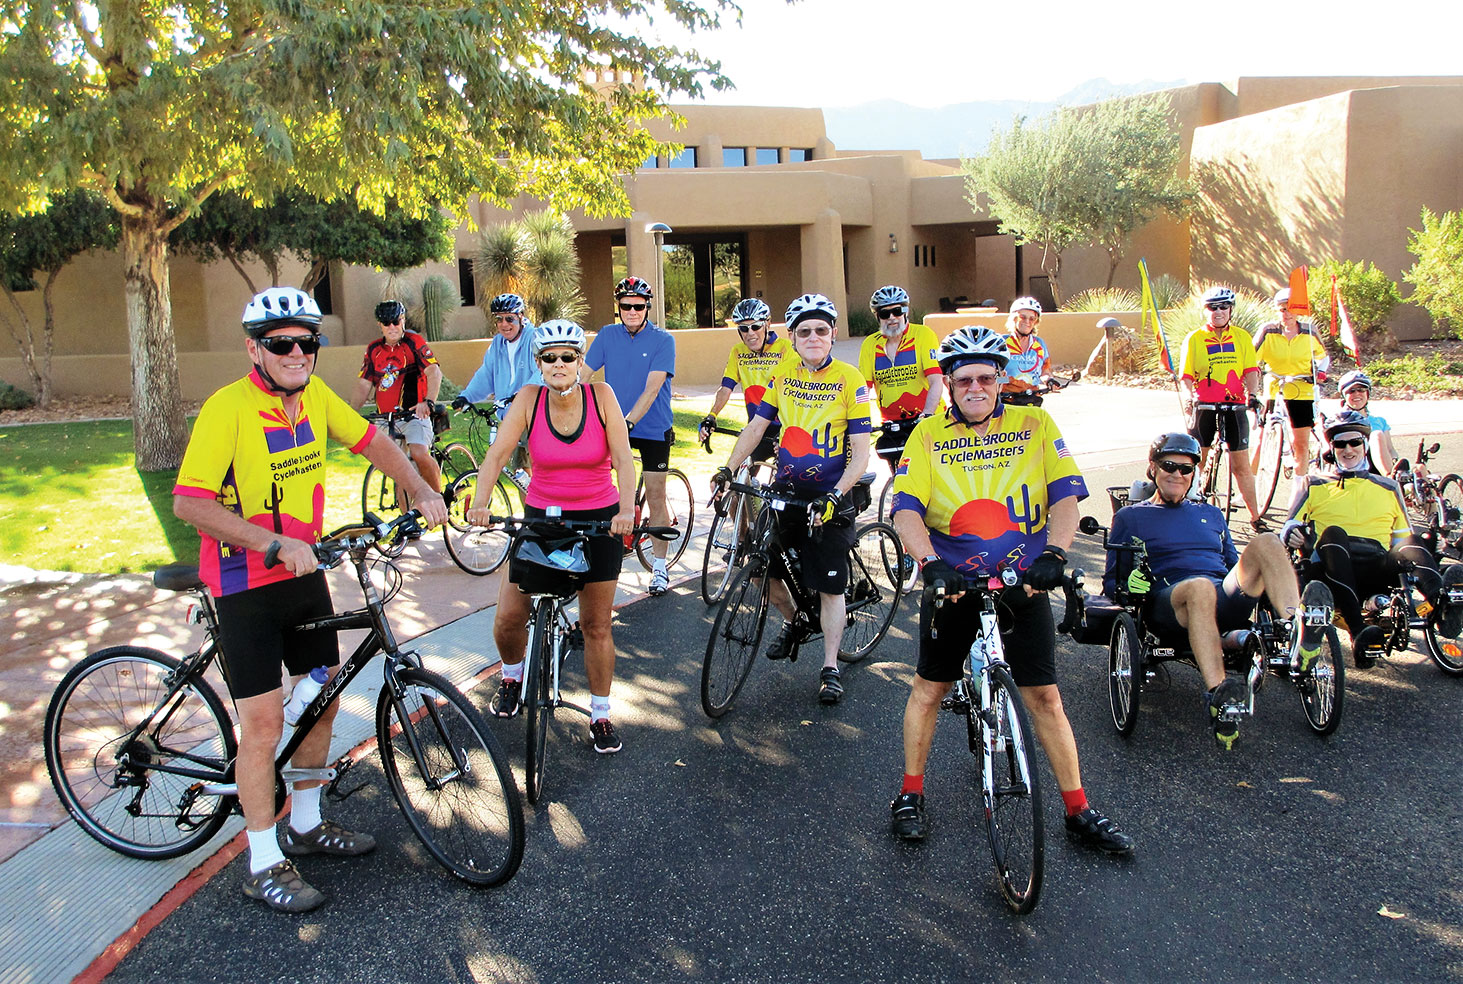 Cyclemasters are ready for another fun ride.